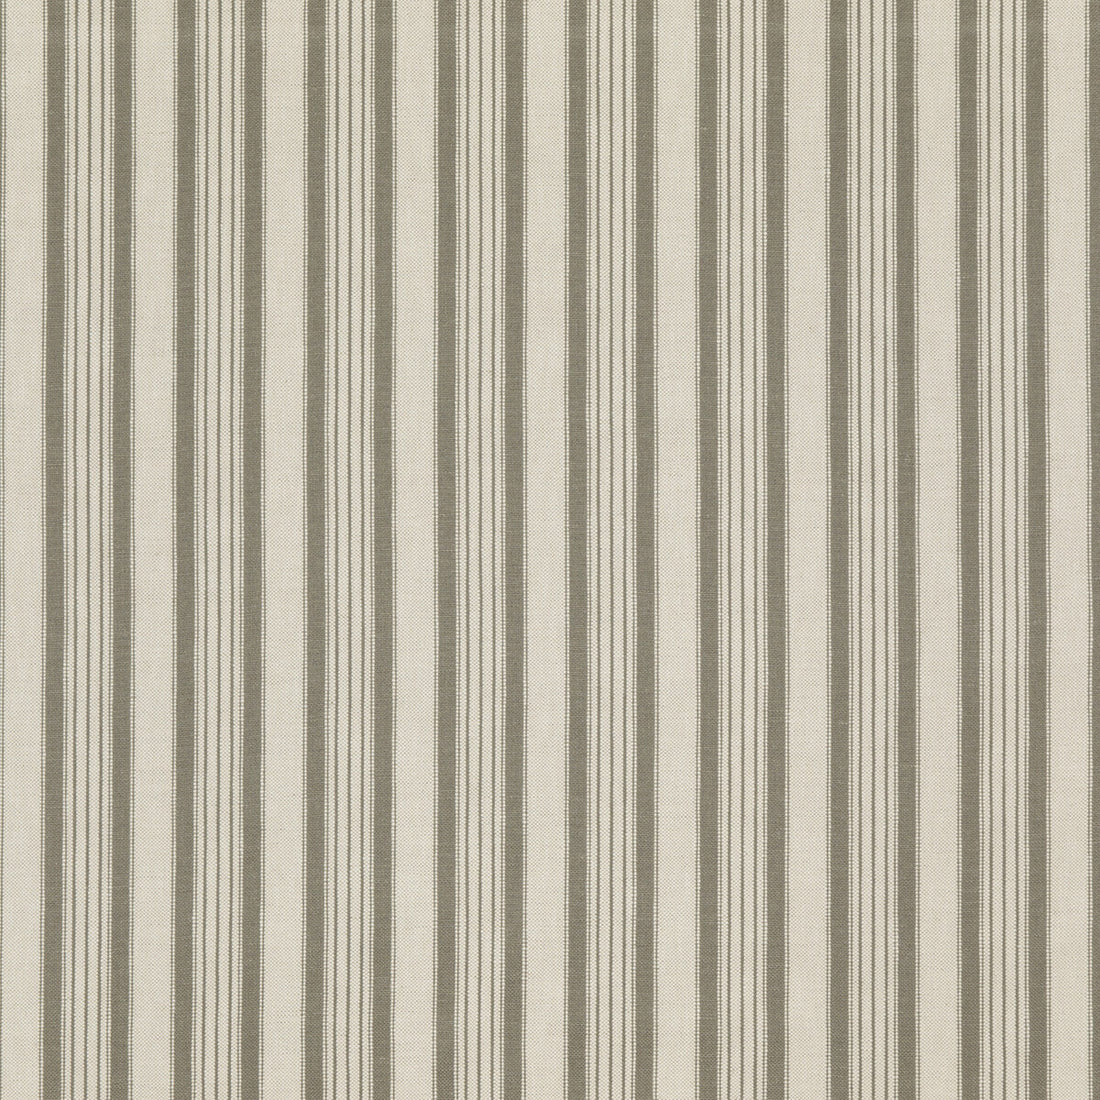 Becket fabric in taupe color - pattern ED85312.210.0 - by Threads in the Great Stripes collection